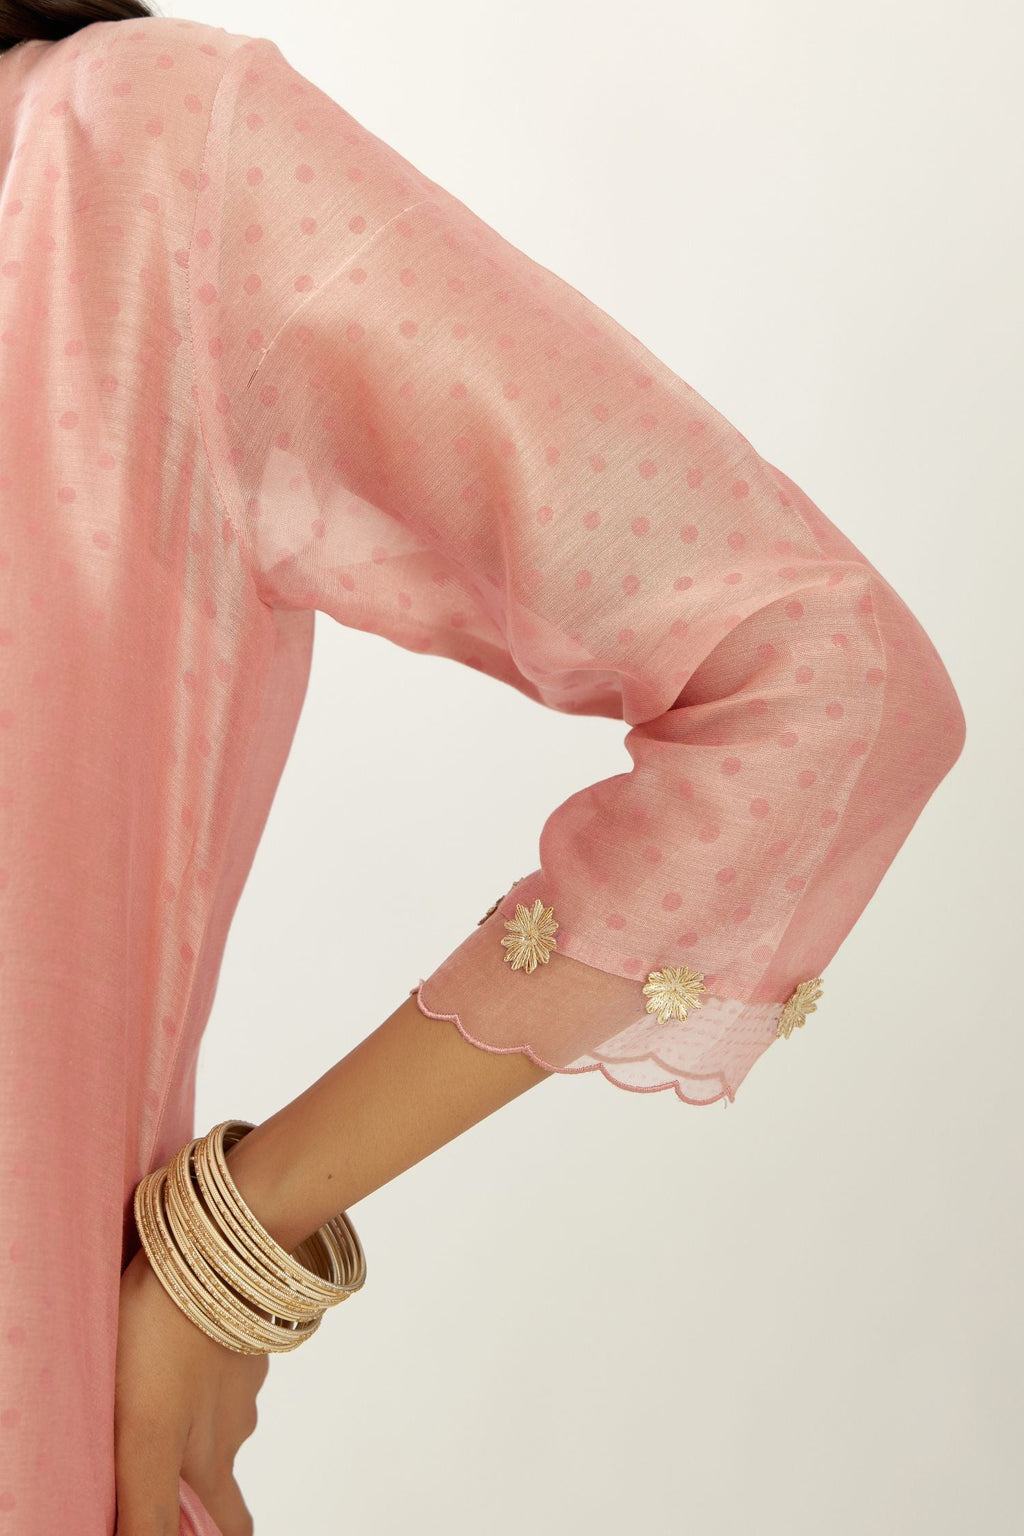 Pink silk chanderi hand block printed straight kurta set, highlighted with organza and gota embroidered flower at edges